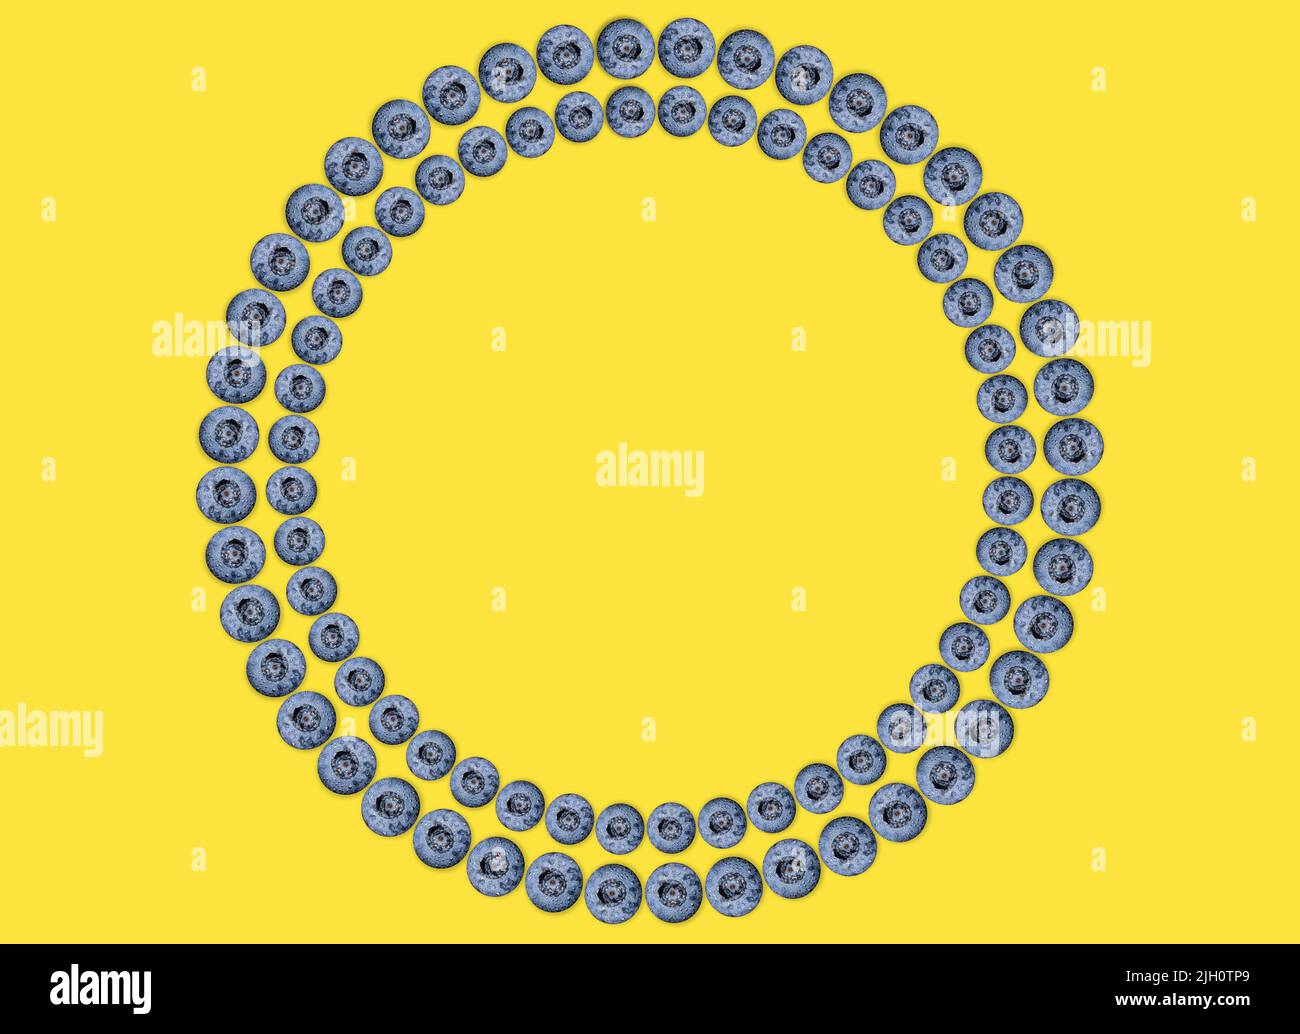 Fresh blueberries arranged into a circle frame isolated on yellow. Stock Photo